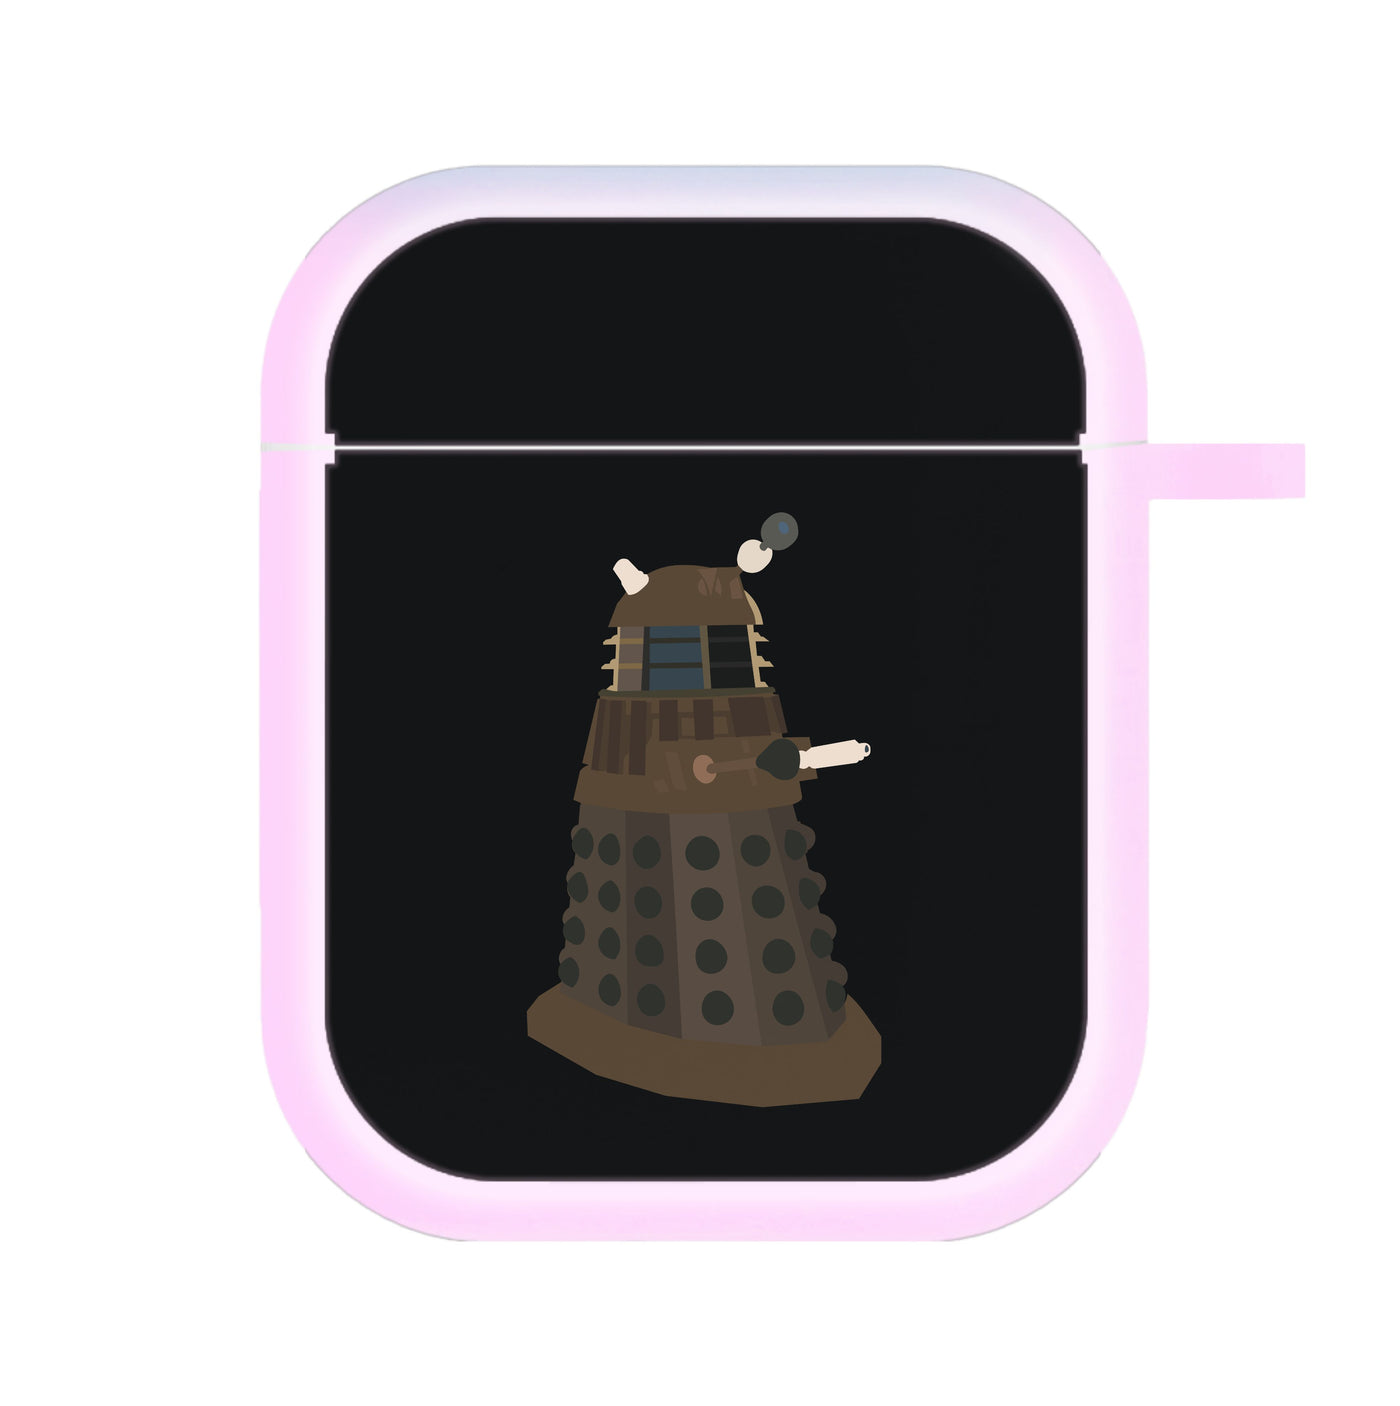 Dalek - Doctor Who AirPods Case